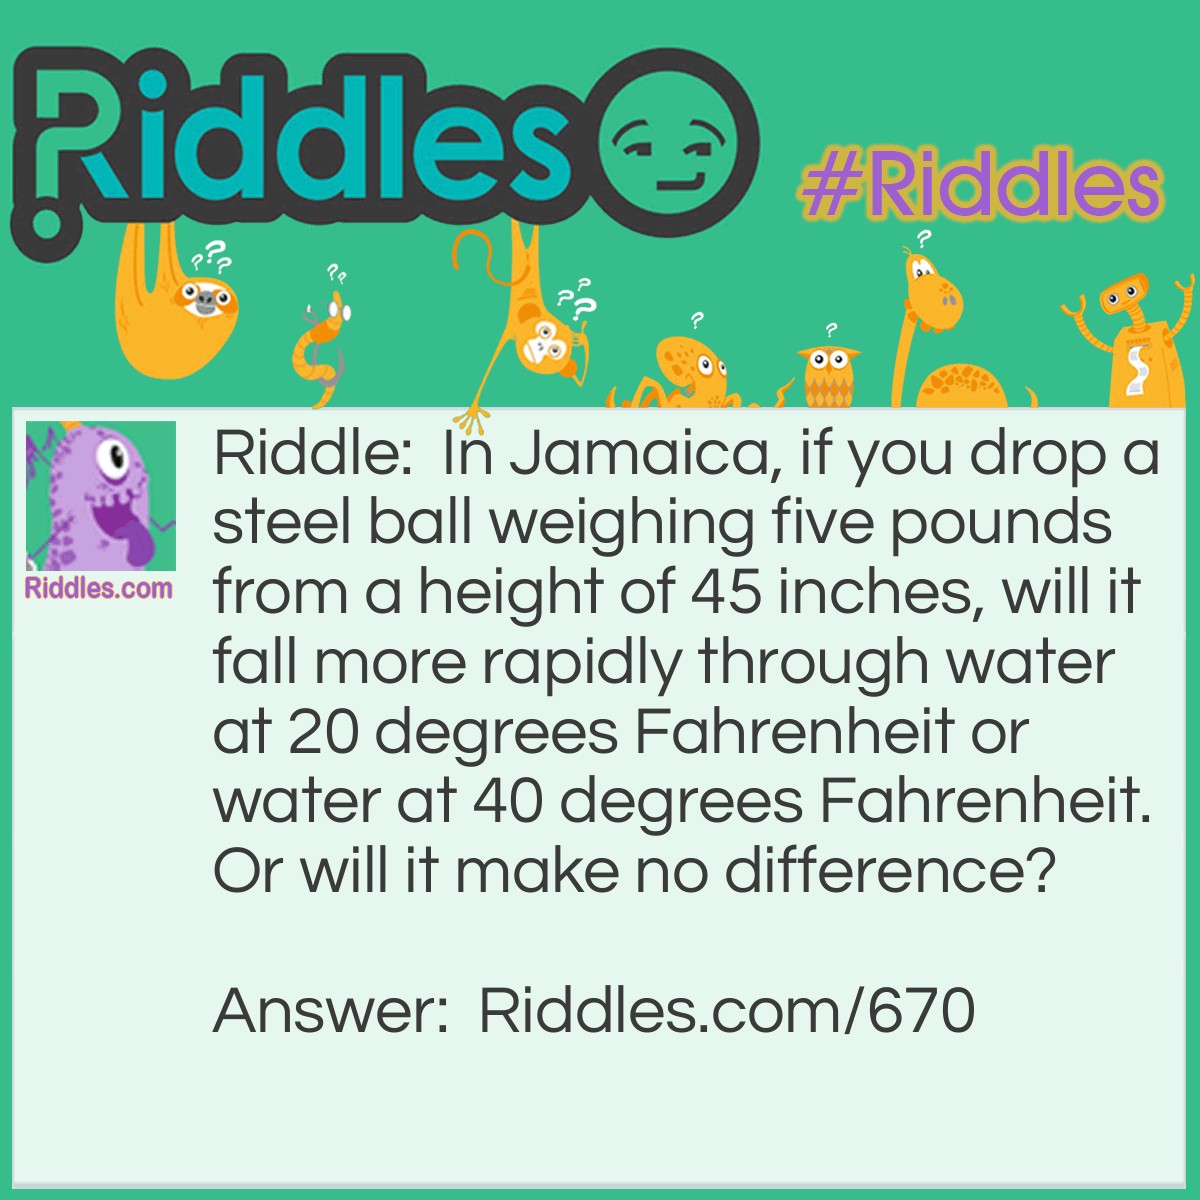 Riddle: In Jamaica, if you drop a steel ball weighing five pounds from a height of 45 inches, will it fall more rapidly through the water at 20 degrees Fahrenheit or water at 40 degrees Fahrenheit? Or will it make no difference? Answer: 40 degrees Fahrenheit. At 20 degrees Fahrenheit the water would be ice.